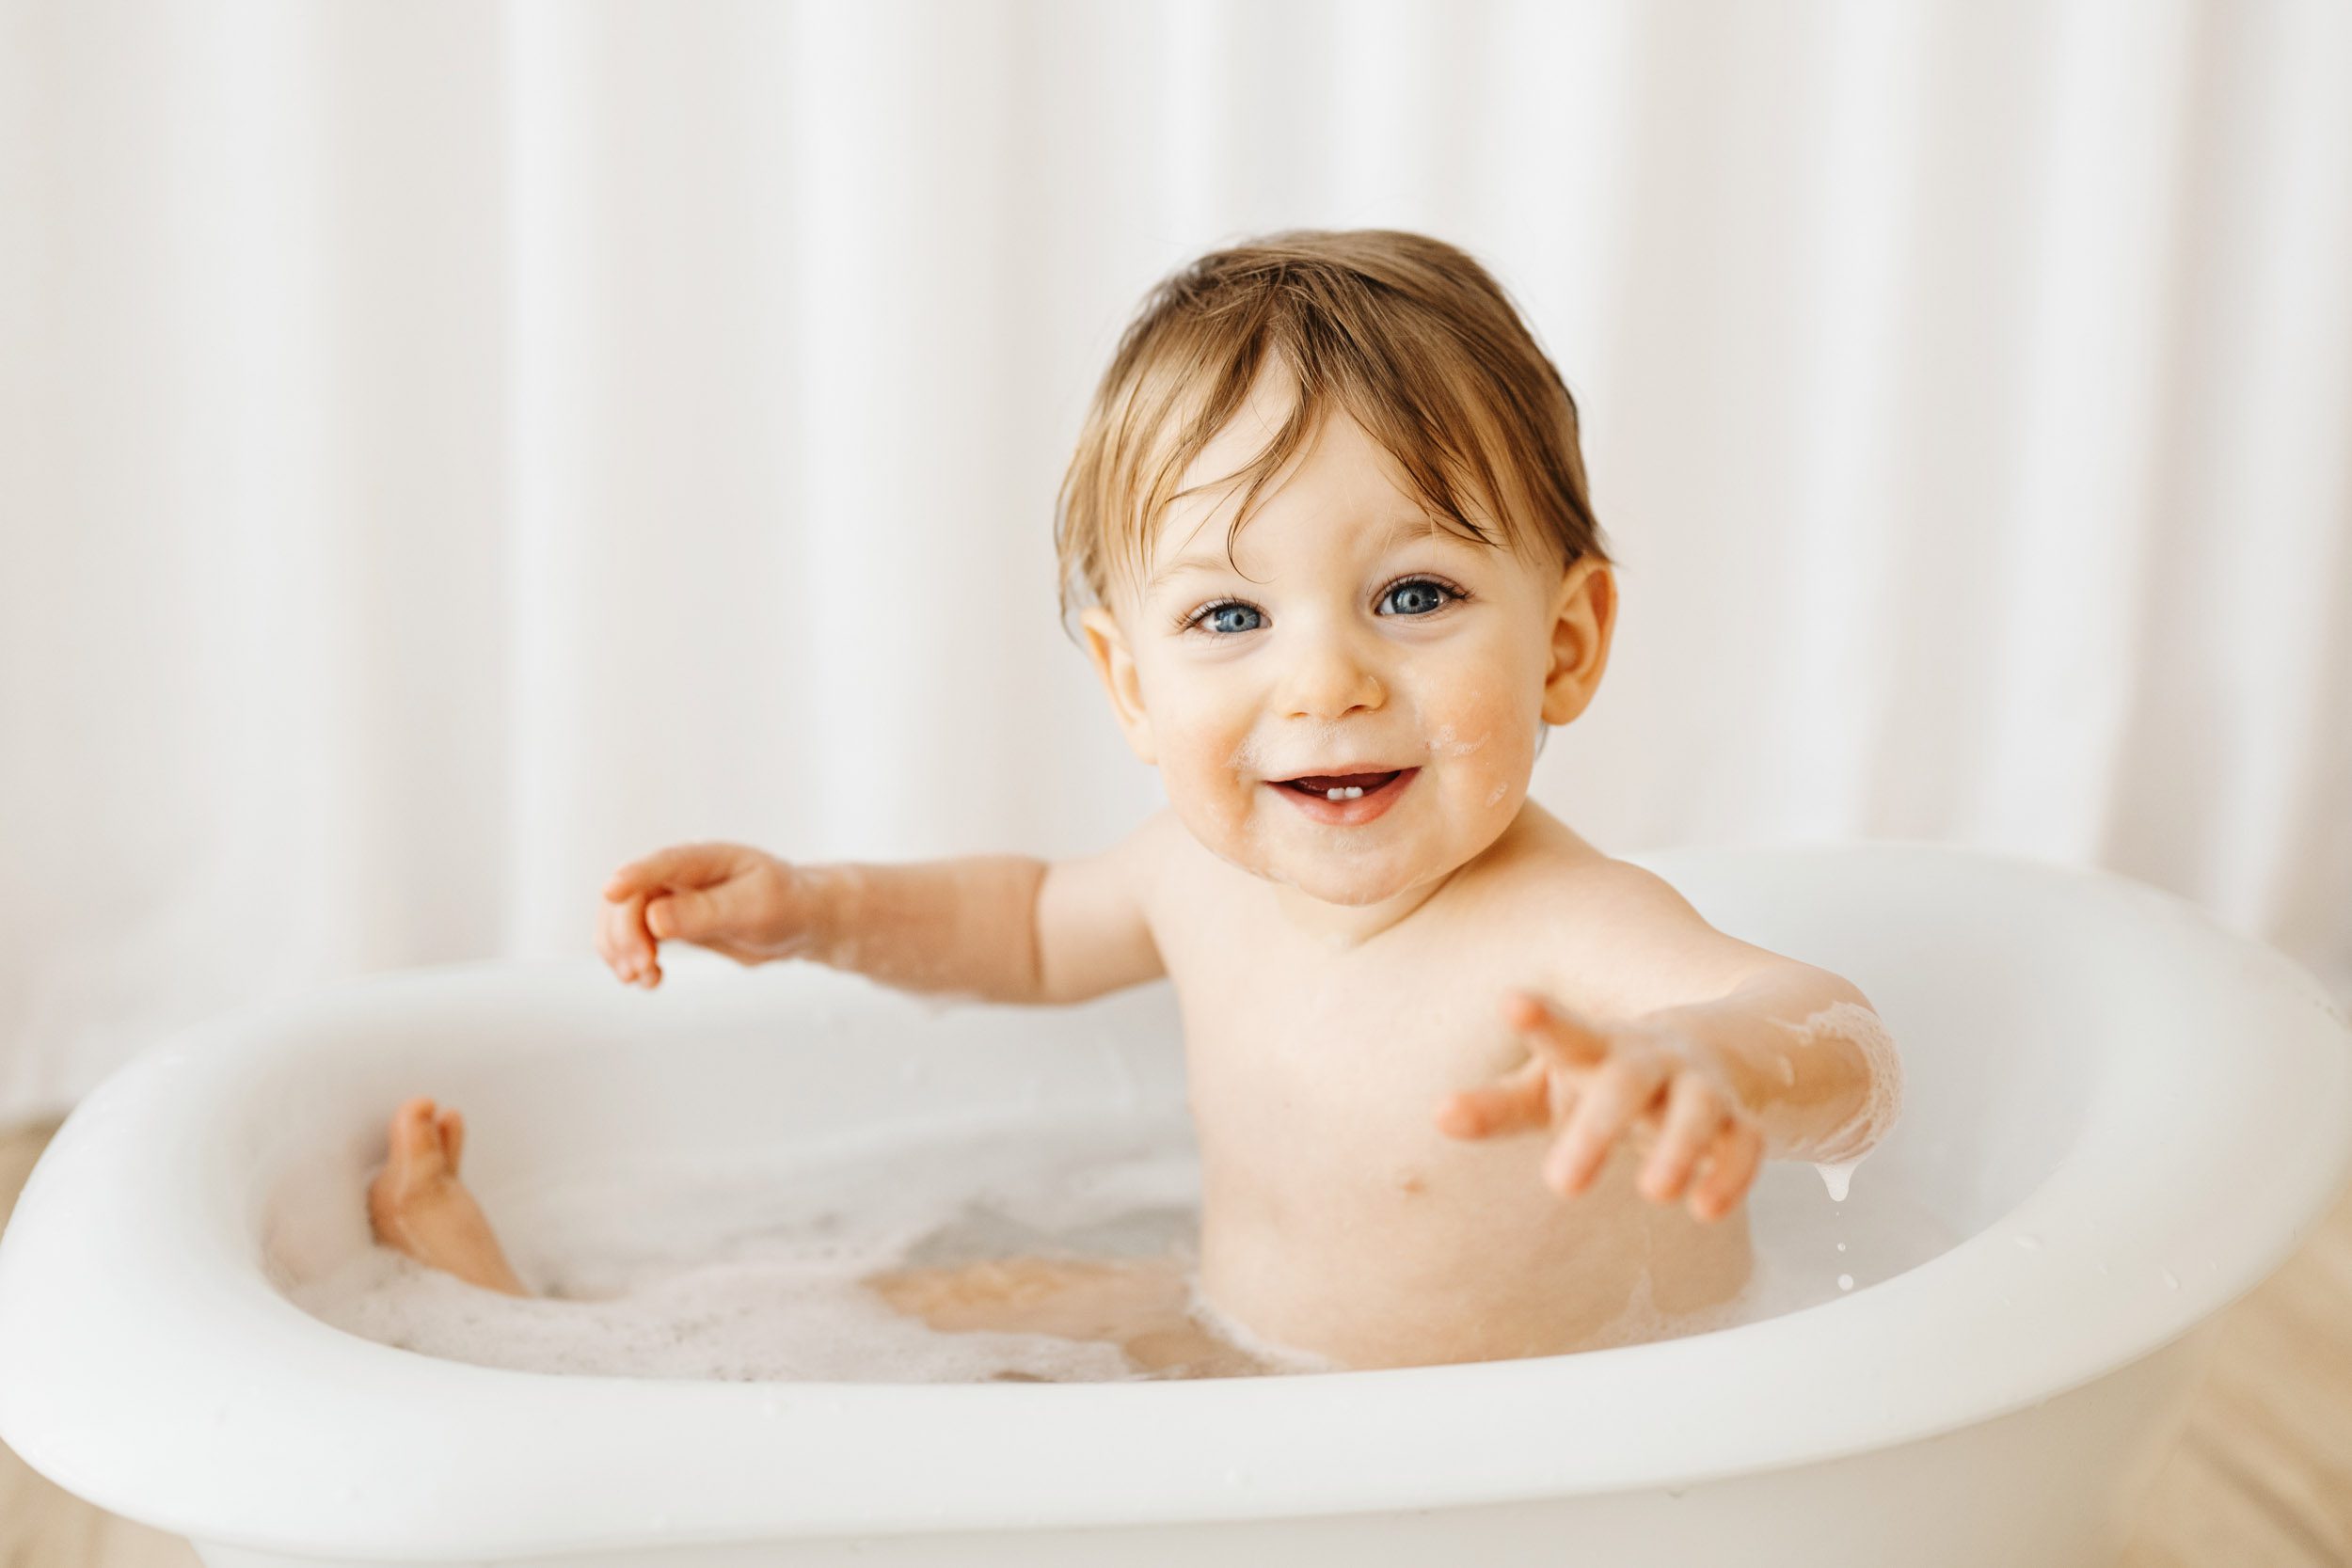 a young boy sitting in a little white bathtub and looking right at the camera with a huge smile on his face during a 1st birthday cake smash & splash photoshoot